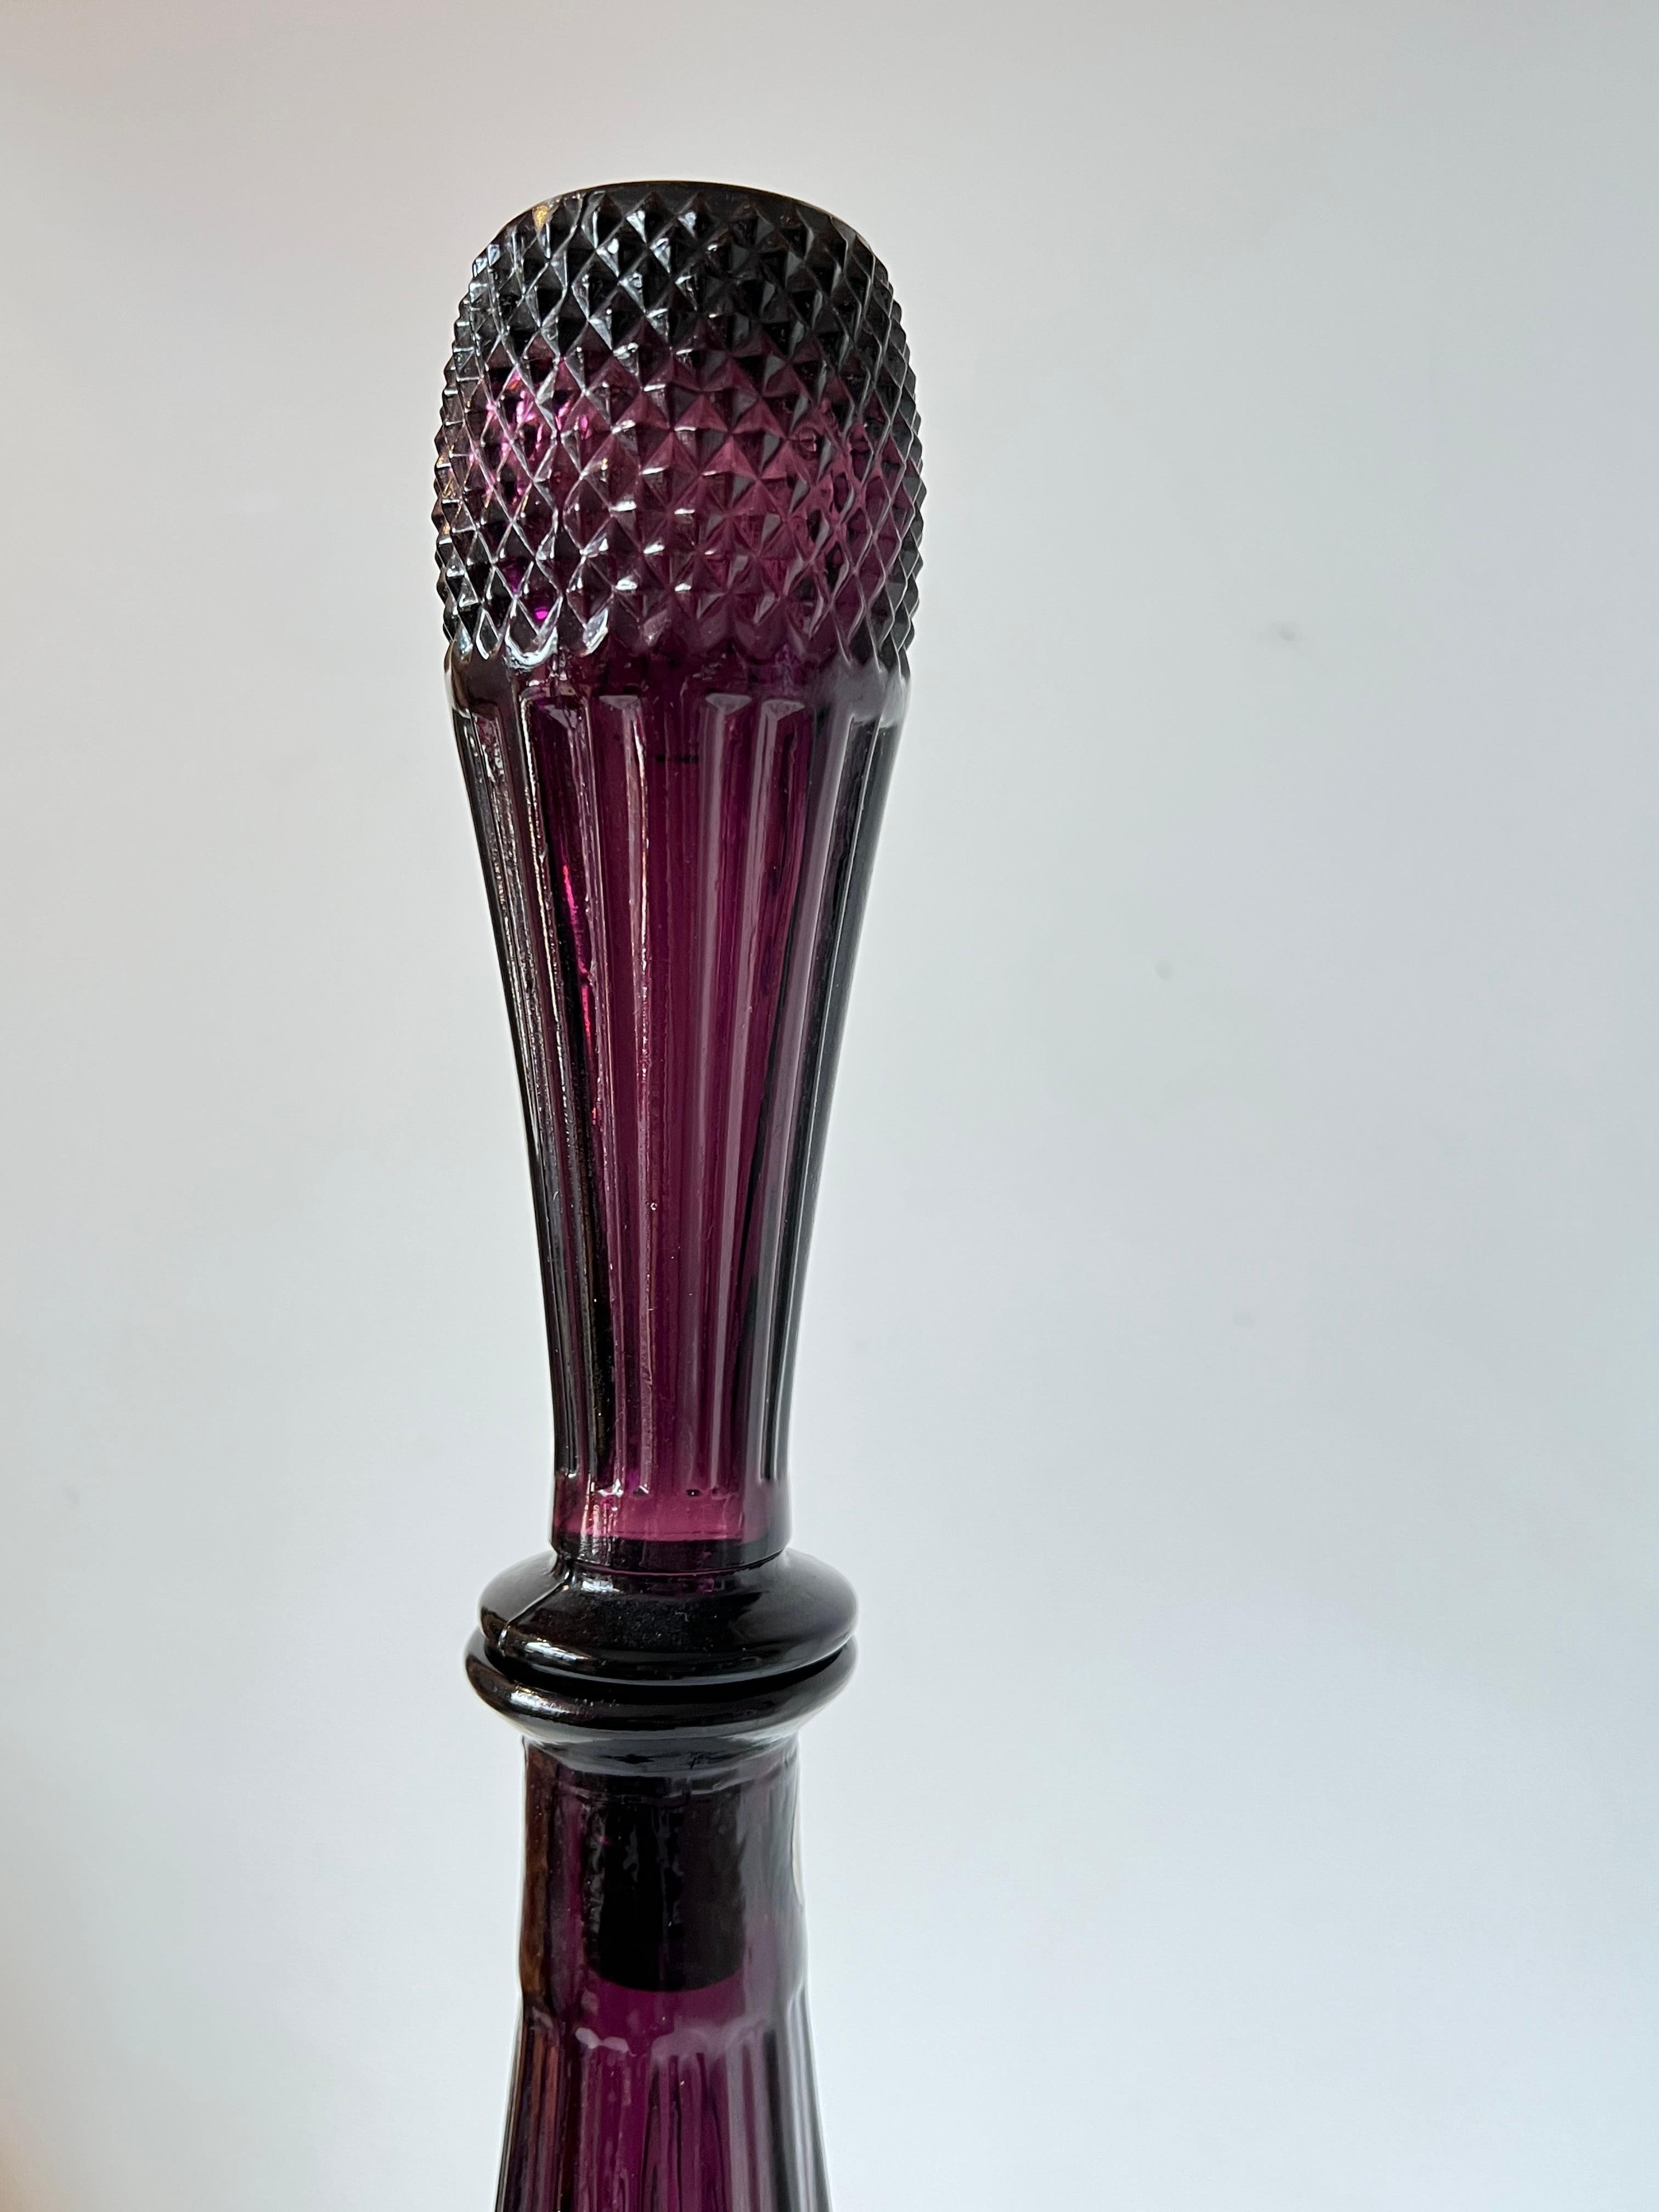 Empoli bottle or decanter, called Genie bottle, with stopper. 
In an original purple colour
Made in Italy, Empoli, fifties/sixties period. 
